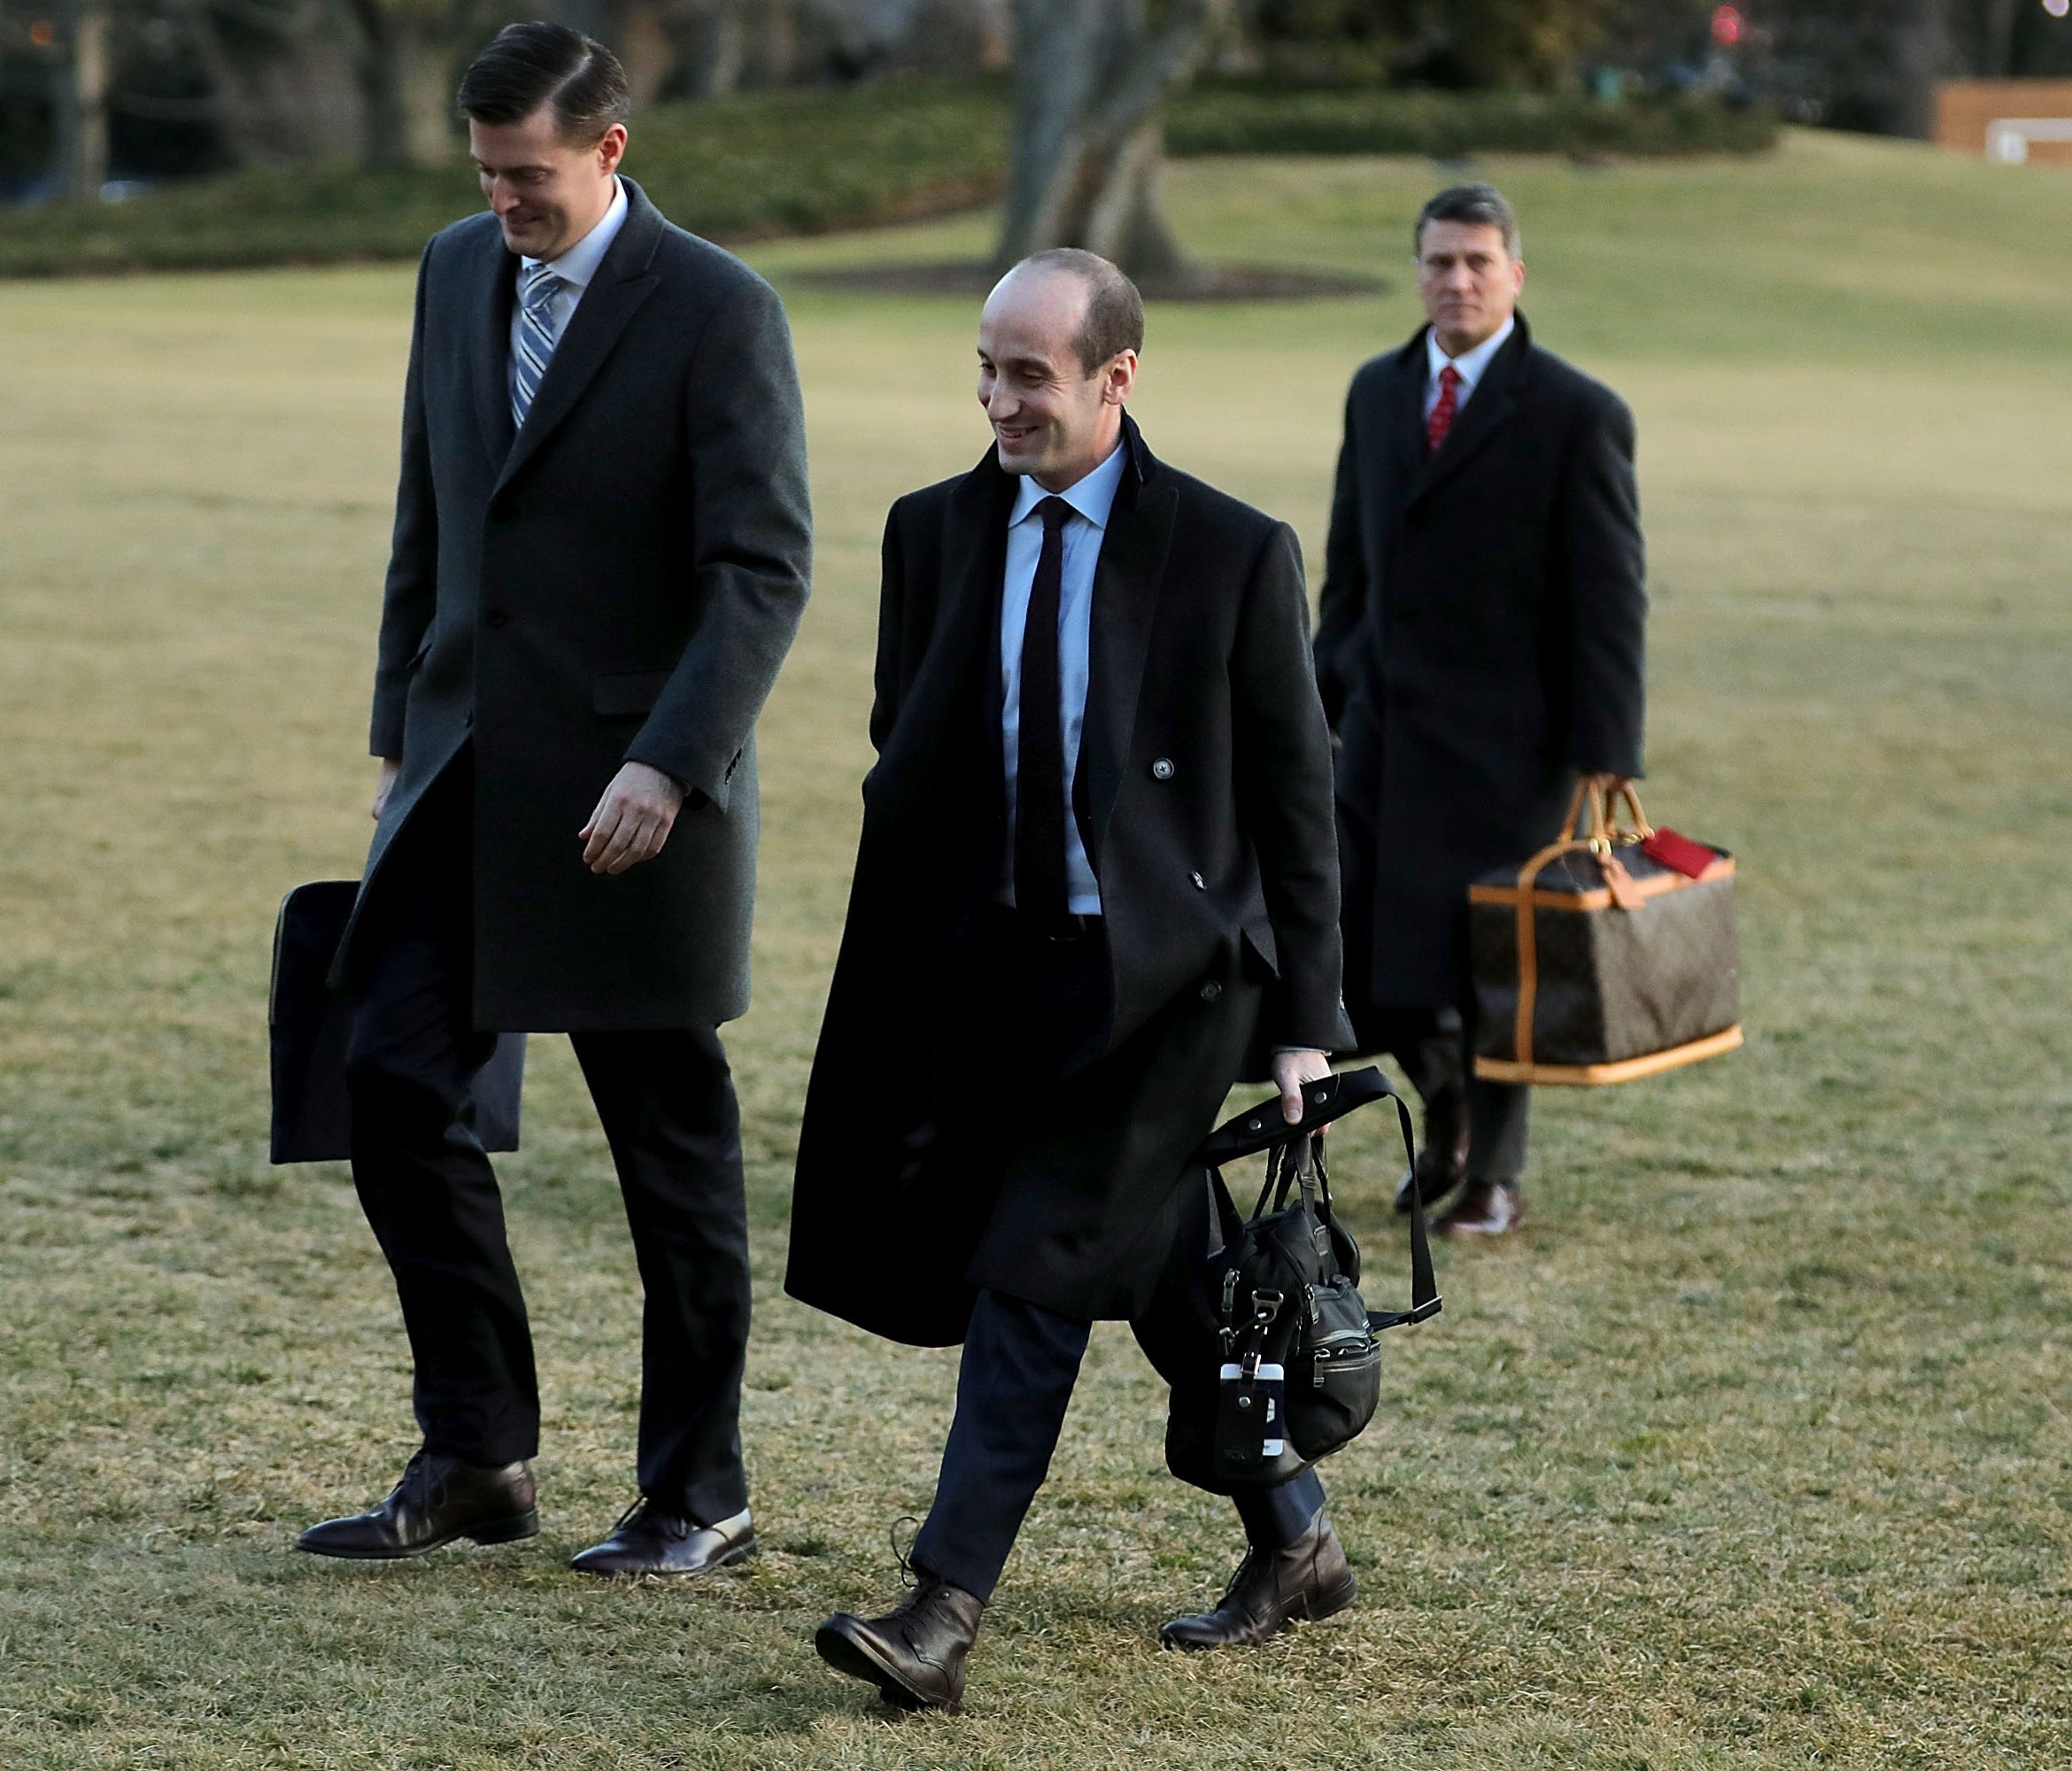 White House Staff Secretary Rob Porter (L) and Senior Advisor to the President Stephen Miller (C) return to the White House after a day trip with President Donald Trump to Cincinnati, Ohio, February 5, 2018 in Washington, DC. While in Ohio President 